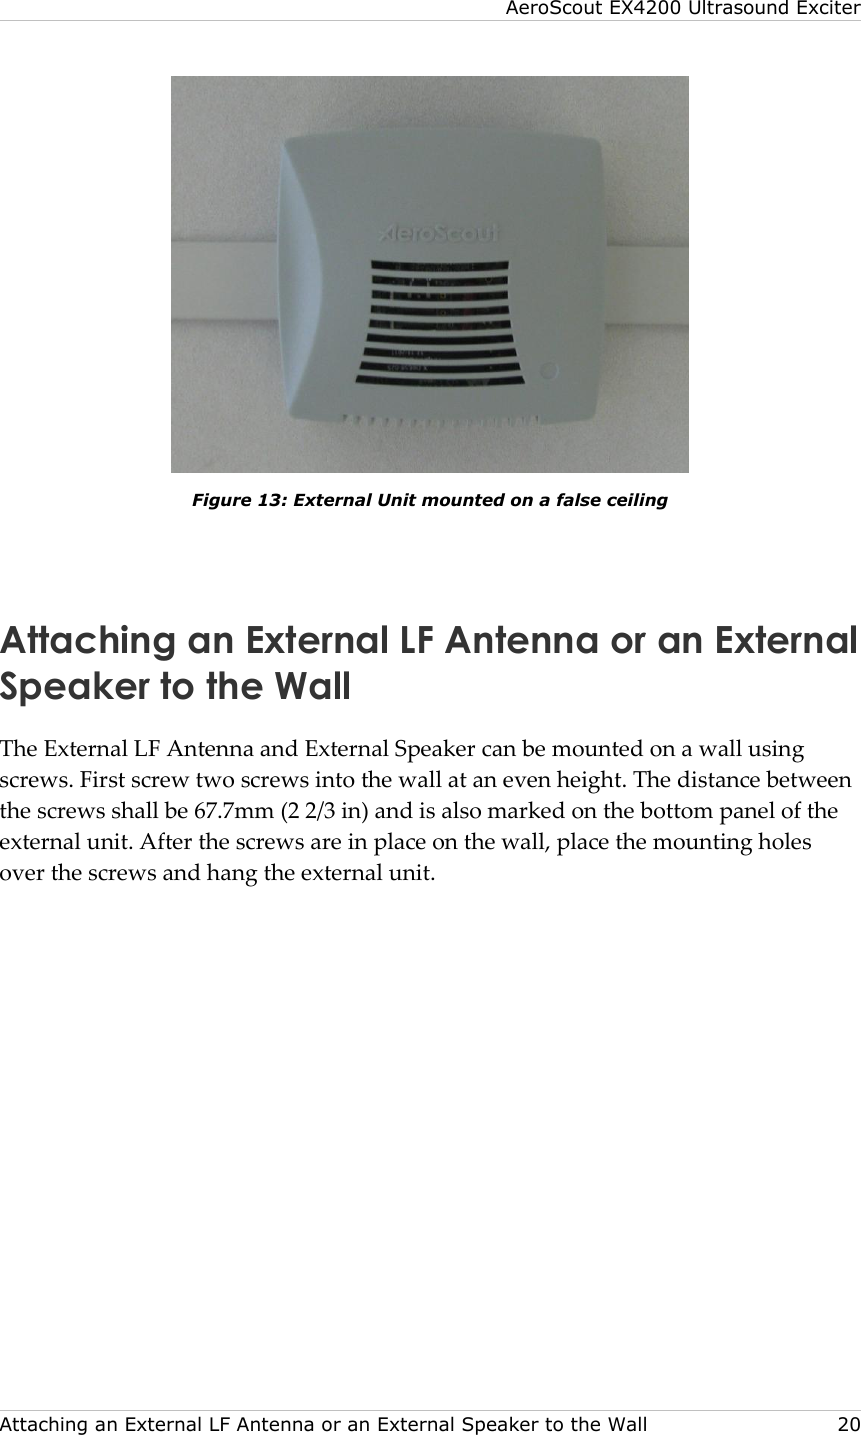 AeroScout EX4200 Ultrasound Exciter  Attaching an External LF Antenna or an External Speaker to the Wall    20  Figure 13: External Unit mounted on a false ceiling  Attaching an External LF Antenna or an External Speaker to the Wall The External LF Antenna and External Speaker can be mounted on a wall using screws. First screw two screws into the wall at an even height. The distance between the screws shall be 67.7mm (2 2/3 in) and is also marked on the bottom panel of the external unit. After the screws are in place on the wall, place the mounting holes over the screws and hang the external unit. 